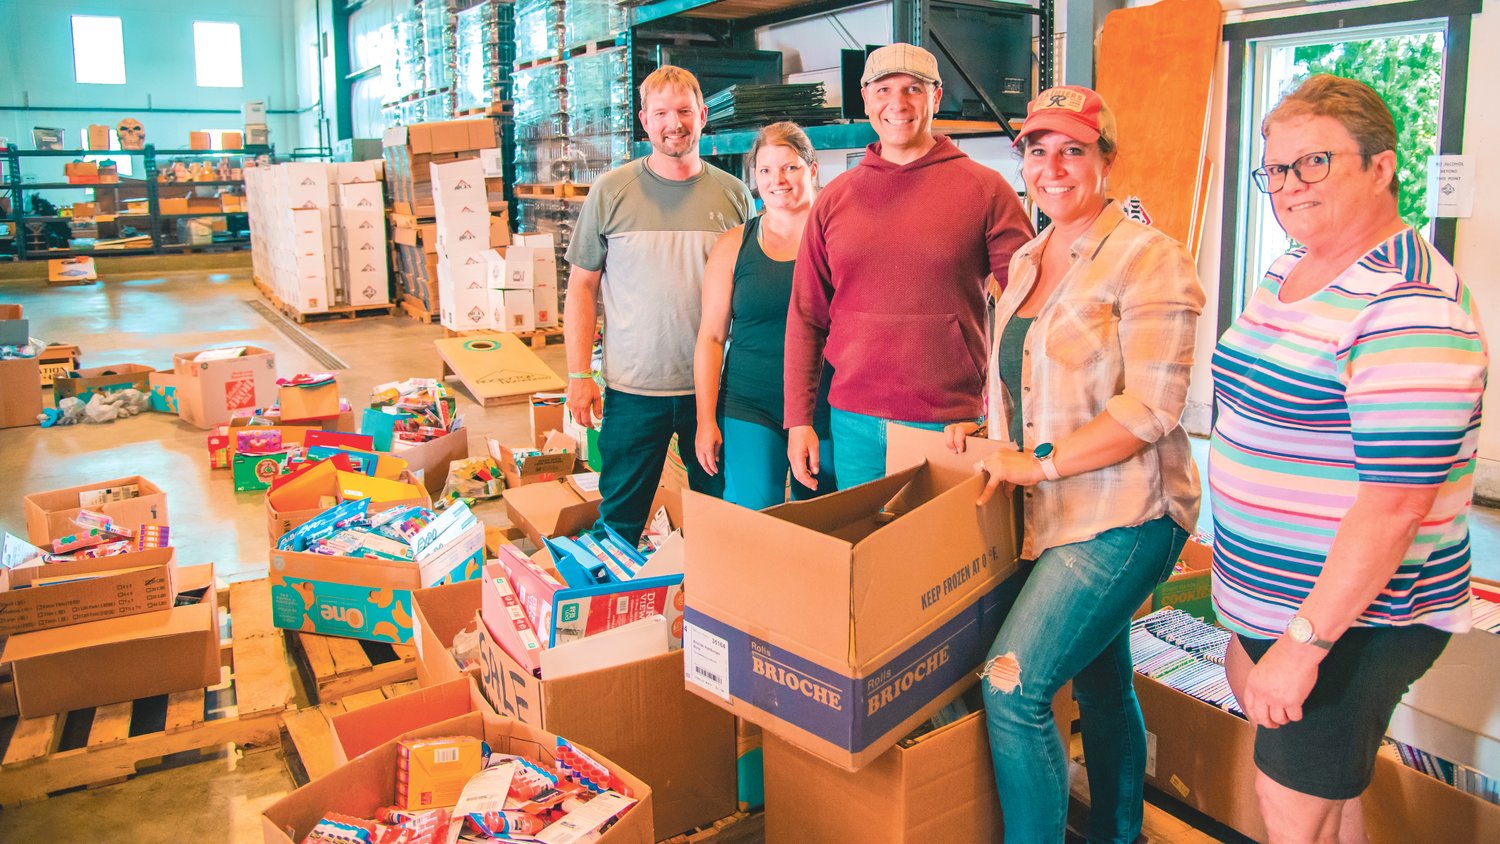 Left to right, Kyle Markstrom, Julie Pendleton, Peter and Holly Abbarno and Marilyn Gallagher pose for a photo while sorting boxes at Dick's Brewing in Centralia on Tuesday after unloading a bus full of school supplies from a 